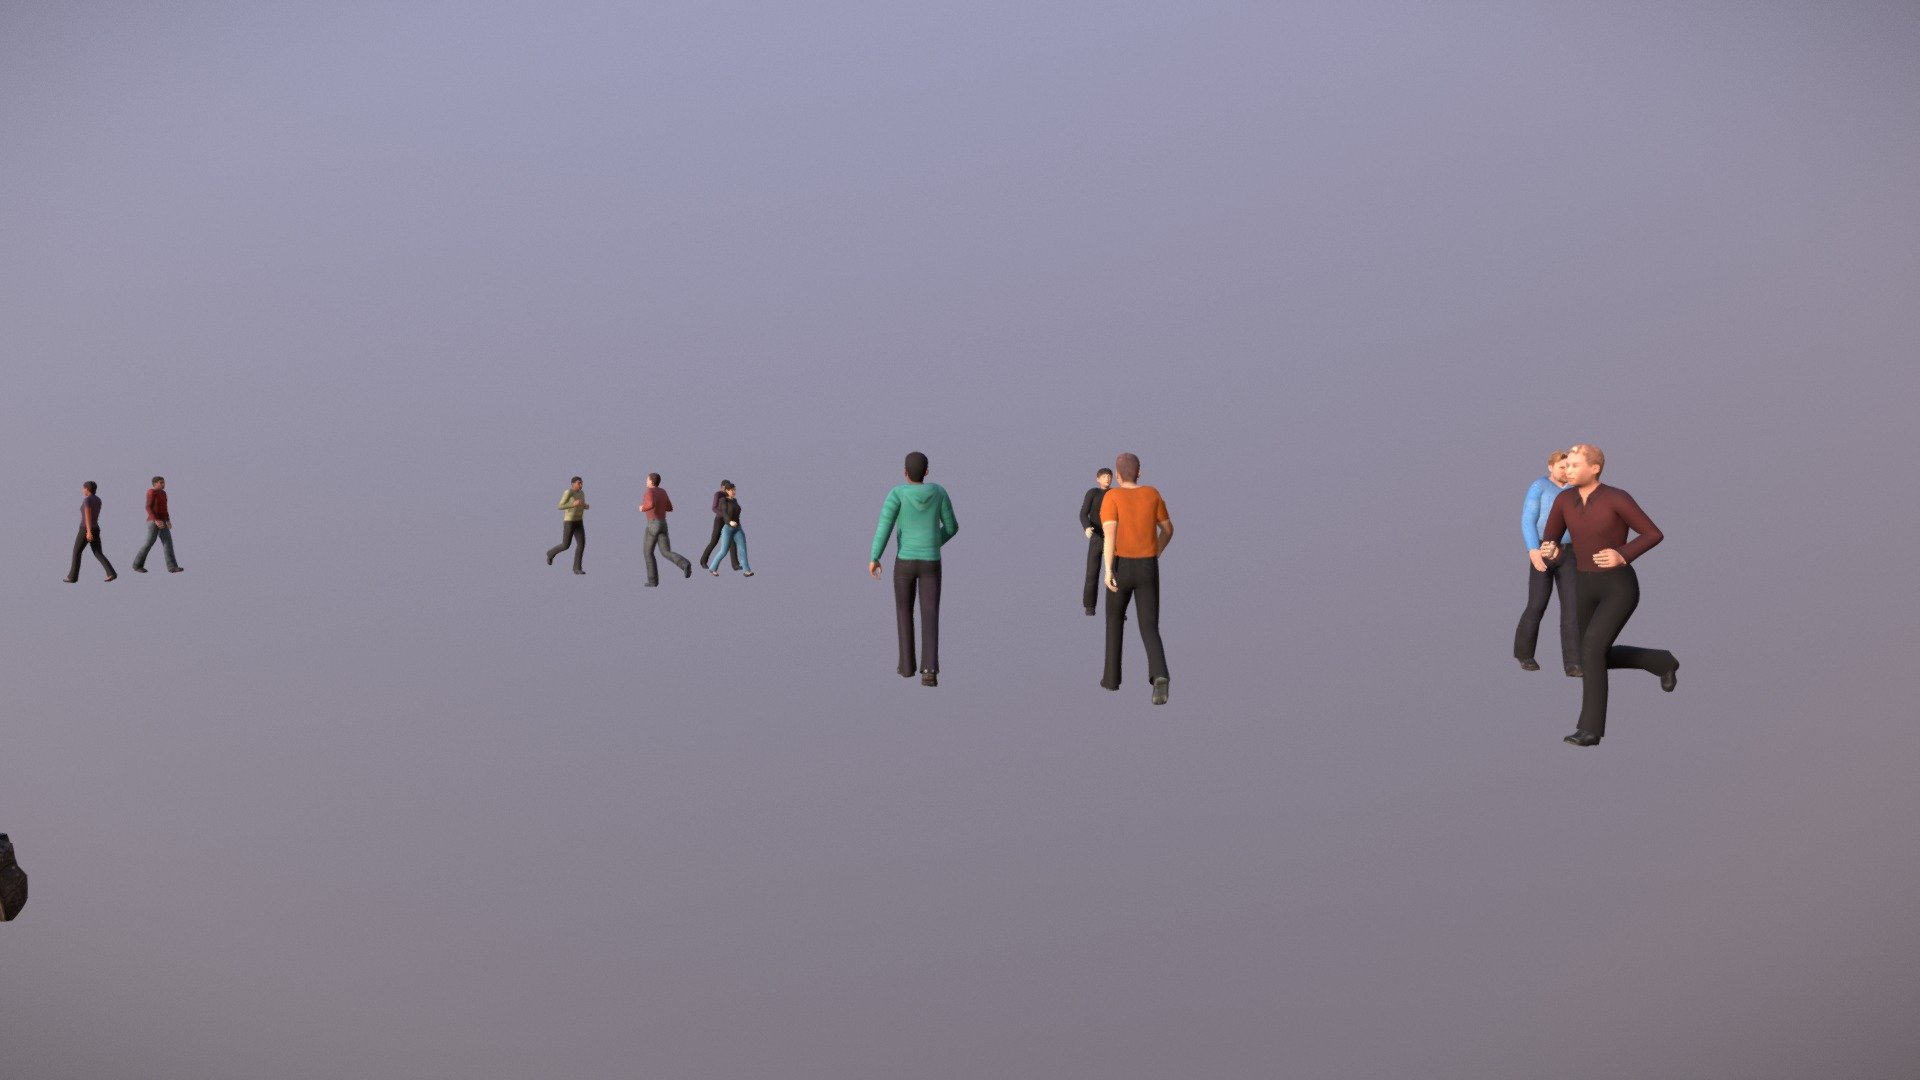 A little crowd test under 3D Studio Max.
You can see running people and walking people looking
all different 3d model